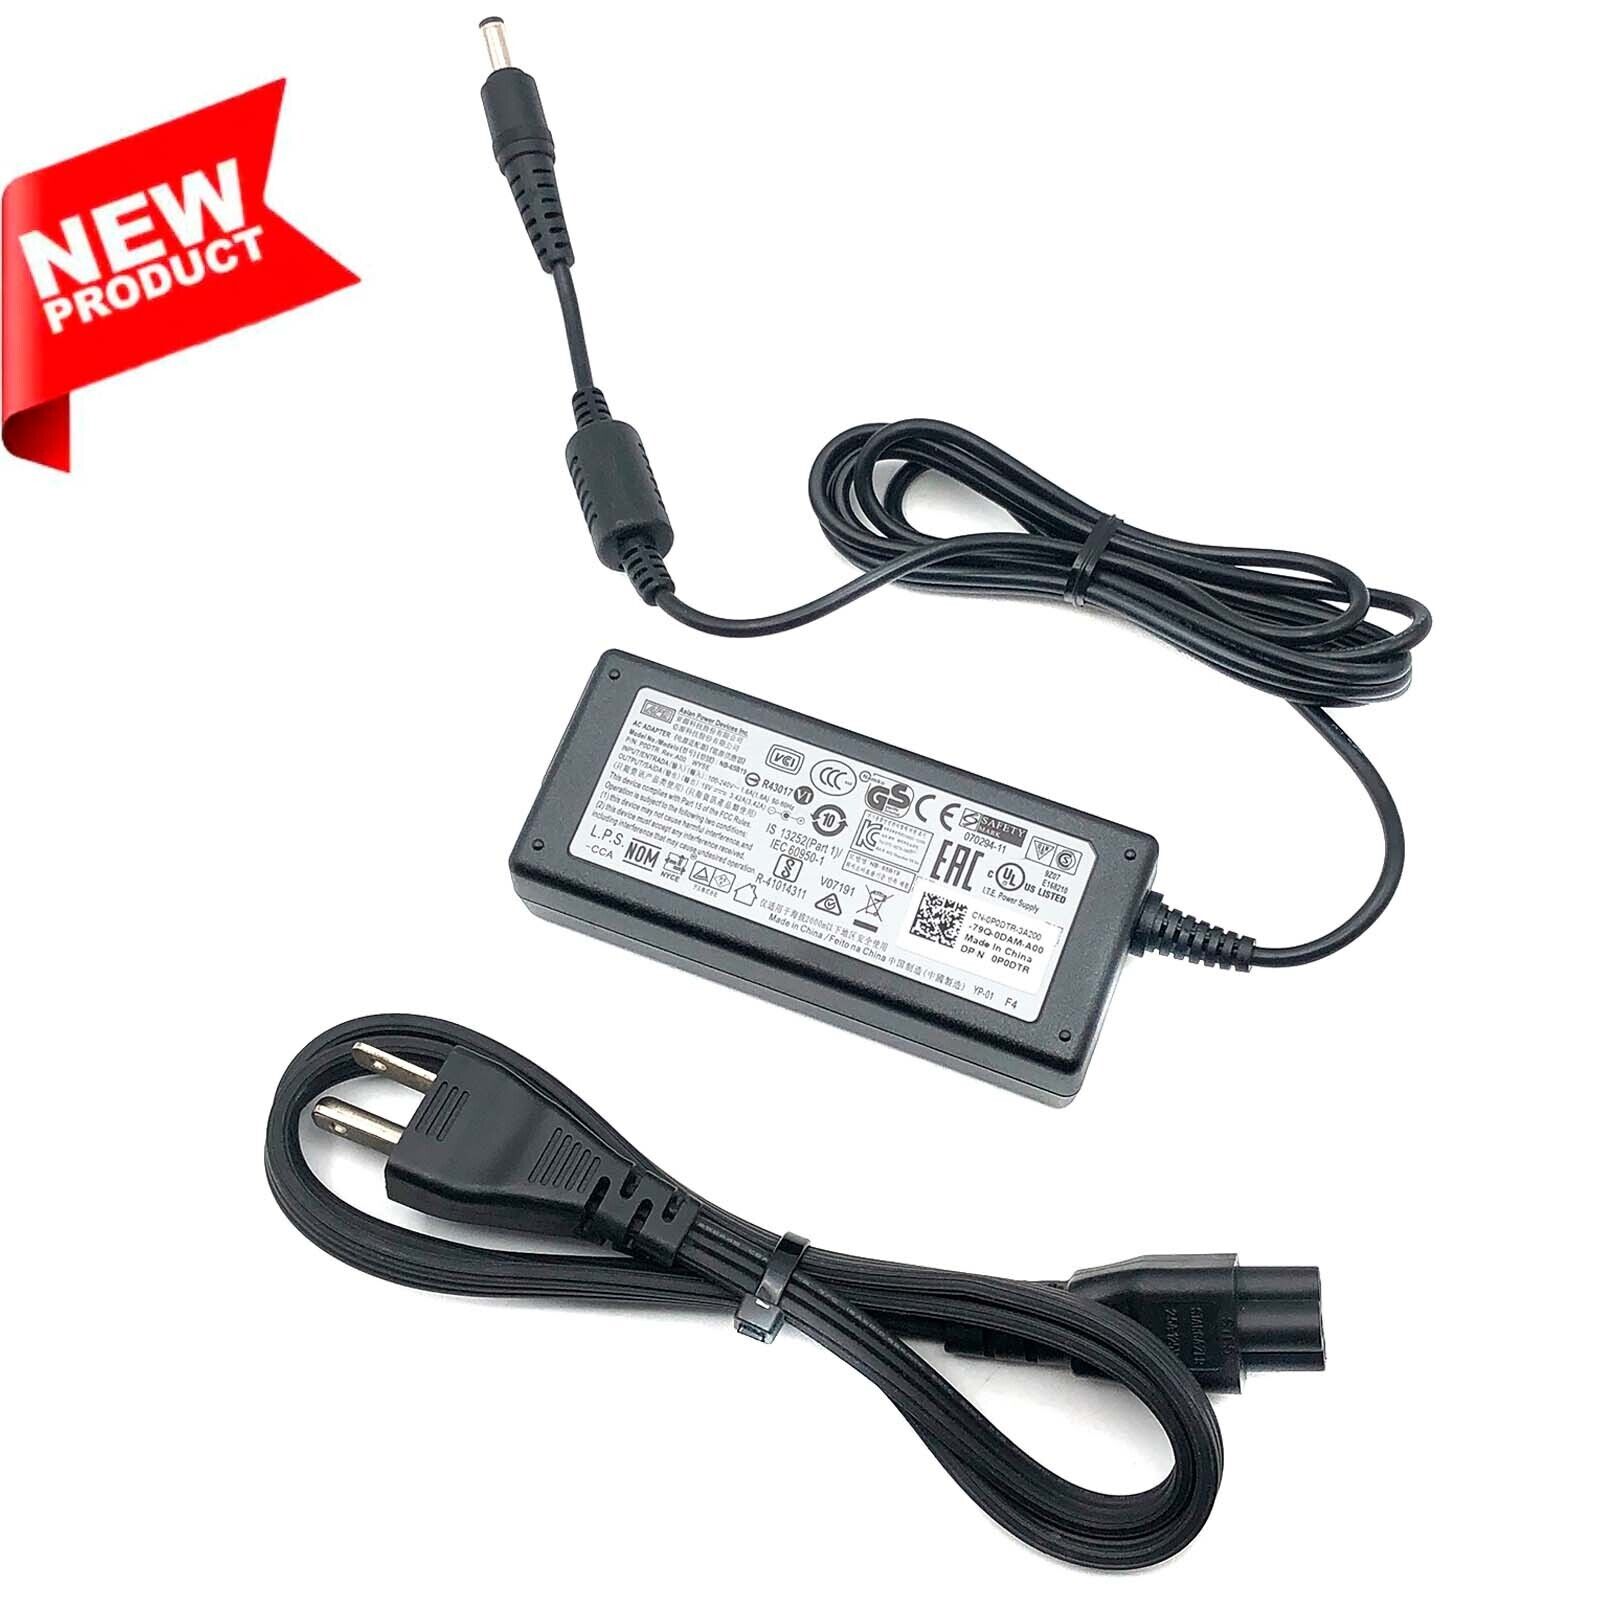 GENUINE APD AC Adapter for JBL Xtreme 2 Extreme 2 JBL Boombox Speaker w/P.Cord